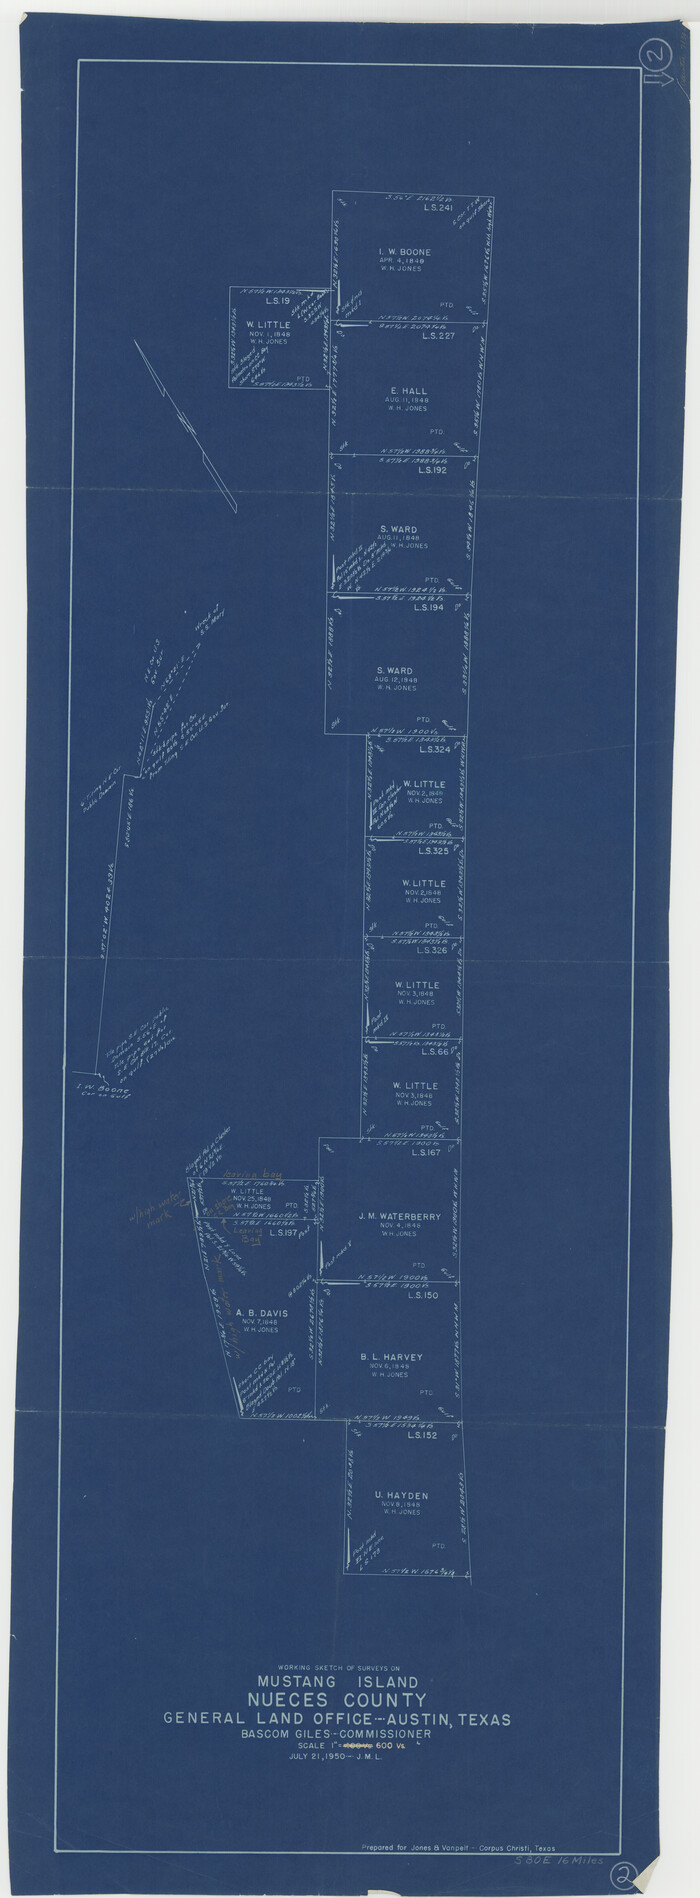 71304, Nueces County Working Sketch 2, General Map Collection